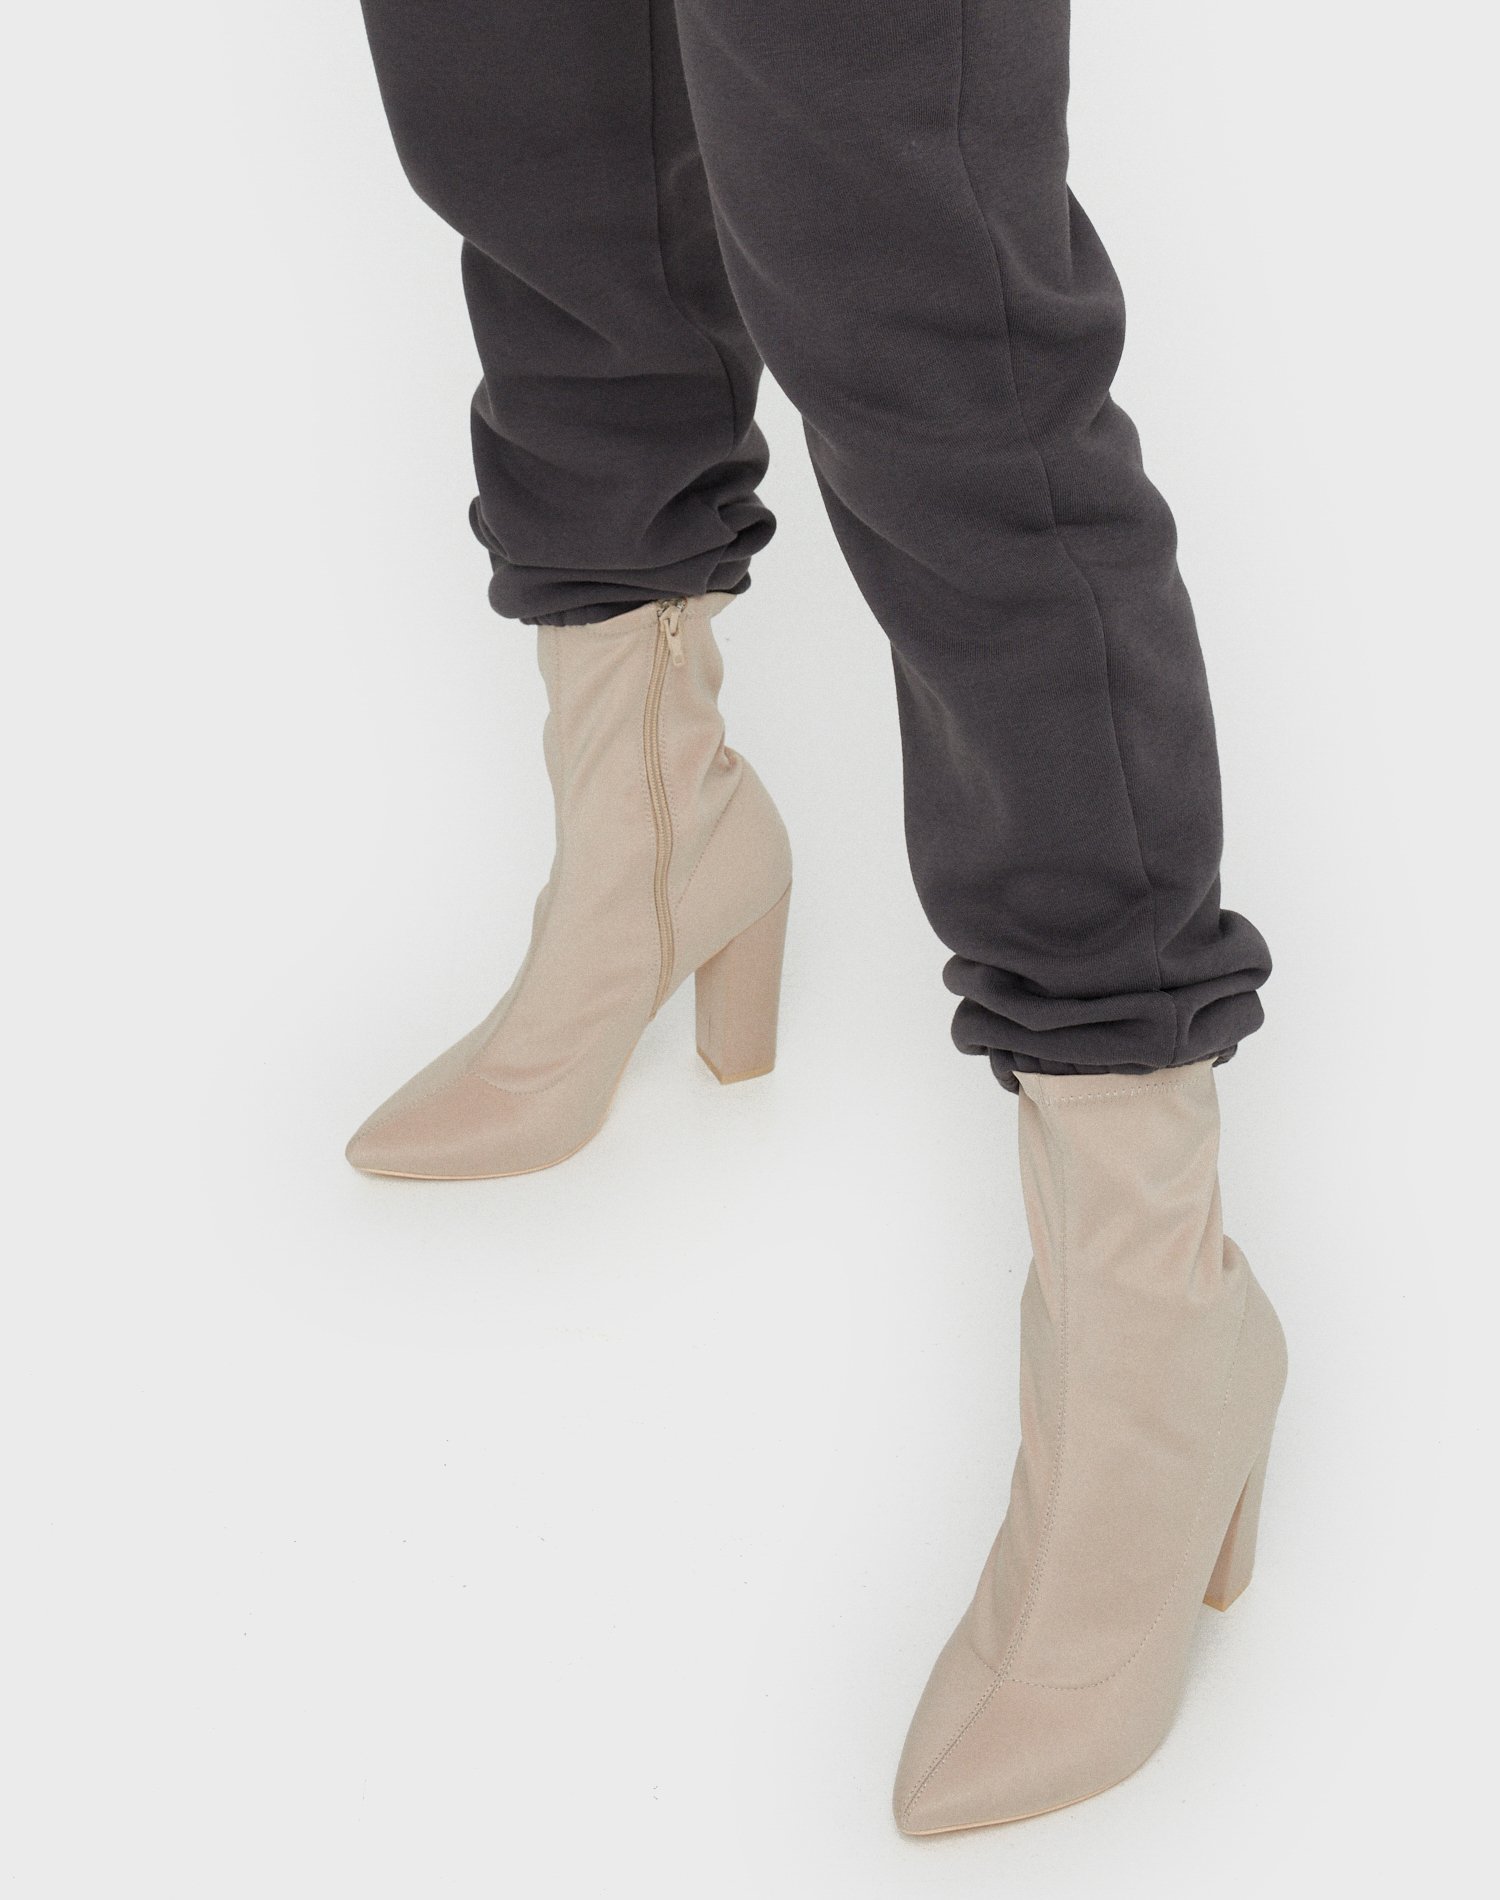 pointy stretchy boot